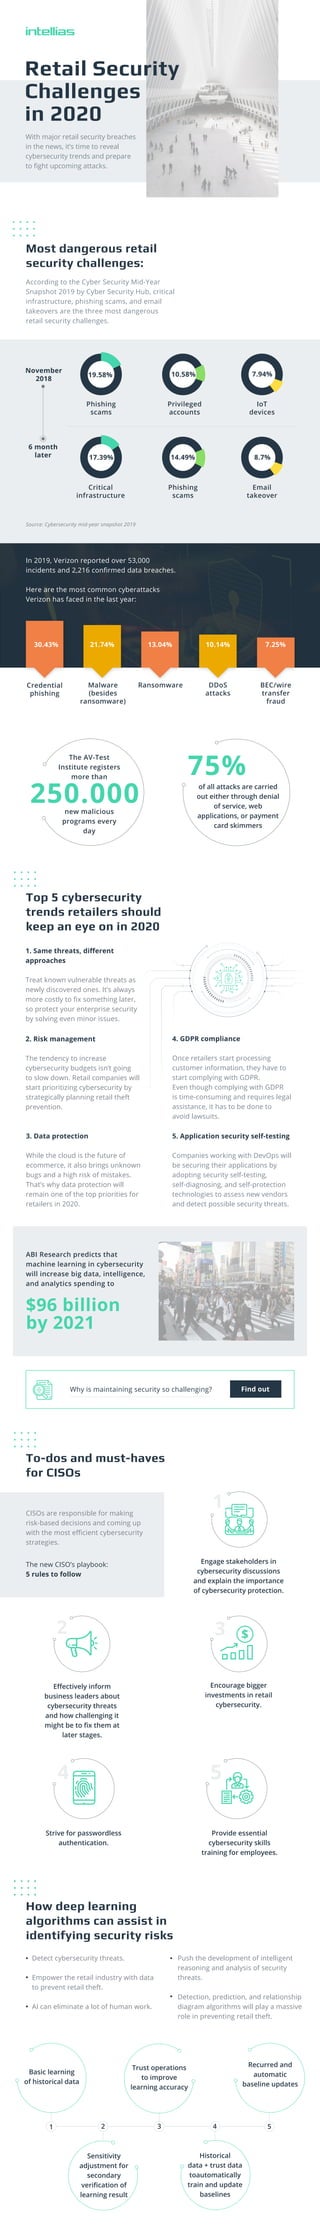 In 2019, Verizon reported over 53,000
incidents and 2,216 conﬁrmed data breaches.
Here are the most common cyberattacks
Verizon has faced in the last year:
Source: Cybersecurity mid-year snapshot 2019
Top 5 cybersecurity
trends retailers should
keep an eye on in 2020
Most dangerous retail
security challenges:
CISOs are responsible for making
risk-based decisions and coming up
with the most eﬃcient cybersecurity
strategies.
The new CISO’s playbook:
5 rules to follow
1
4 5
4. GDPR compliance
Once retailers start processing
customer information, they have to
start complying with GDPR.
Even though complying with GDPR
is time-consuming and requires legal
assistance, it has to be done to
avoid lawsuits.
5. Application security self-testing
Companies working with DevOps will
be securing their applications by
adopting security self-testing,
self-diagnosing, and self-protection
technologies to assess new vendors
and detect possible security threats.
Credential
phishing
Malware
(besides
ransomware)
Ransomware DDoS
attacks
BEC/wire
transfer
fraud
30.43%
November
2018
Phishing
scams
6 month
later
Privileged
accounts
IoT
devices
7.94%
Critical
infrastructure
Phishing
scams
Email
takeover
21.74% 13.04% 10.14% 7.25%
3. Data protection
While the cloud is the future of
ecommerce, it also brings unknown
bugs and a high risk of mistakes.
That’s why data protection will
remain one of the top priorities for
retailers in 2020.
To-dos and must-haves
for CISOs
ABI Research predicts that
machine learning in cybersecurity
will increase big data, intelligence,
and analytics spending to
75%
new malicious
programs every
day
The AV-Test
Institute registers
more than
of all attacks are carried
out either through denial
of service, web
applications, or payment
card skimmers
250.000
Engage stakeholders in
cybersecurity discussions
and explain the importance
of cybersecurity protection.
32
Eﬀectively inform
business leaders about
cybersecurity threats
and how challenging it
might be to ﬁx them at
later stages.
Encourage bigger
investments in retail
cybersecurity.
Strive for passwordless
authentication.
Provide essential
cybersecurity skills
training for employees.
How deep learning
algorithms can assist in
identifying security risks
Detect cybersecurity threats.
Empower the retail industry with data
to prevent retail theft.
AI can eliminate a lot of human work.
Push the development of intelligent
reasoning and analysis of security
threats.
Detection, prediction, and relationship
diagram algorithms will play a massive
role in preventing retail theft.
Basic learning
of historical data
Sensitivity
adjustment for
secondary
veriﬁcation of
learning result
Trust operations
to improve
learning accuracy
Historical
data + trust data
toautomatically
train and update
baselines
Recurred and
automatic
baseline updates
1 2 3 4 5
According to the Cyber Security Mid-Year
Snapshot 2019 by Cyber Security Hub, critical
infrastructure, phishing scams, and email
takeovers are the three most dangerous
retail security challenges.
With major retail security breaches
in the news, it’s time to reveal
cybersecurity trends and prepare
to ﬁght upcoming attacks.
Retail Security
Challenges
in 2020
19.58% 10.58%
1. Same threats, diﬀerent
approaches
Treat known vulnerable threats as
newly discovered ones. It’s always
more costly to ﬁx something later,
so protect your enterprise security
by solving even minor issues.
2. Risk management
The tendency to increase
cybersecurity budgets isn’t going
to slow down. Retail companies will
start prioritizing cybersecurity by
strategically planning retail theft
prevention.
$96 billion
by 2021
Why is maintaining security so challenging?
8.7%17.39% 14.49%
 